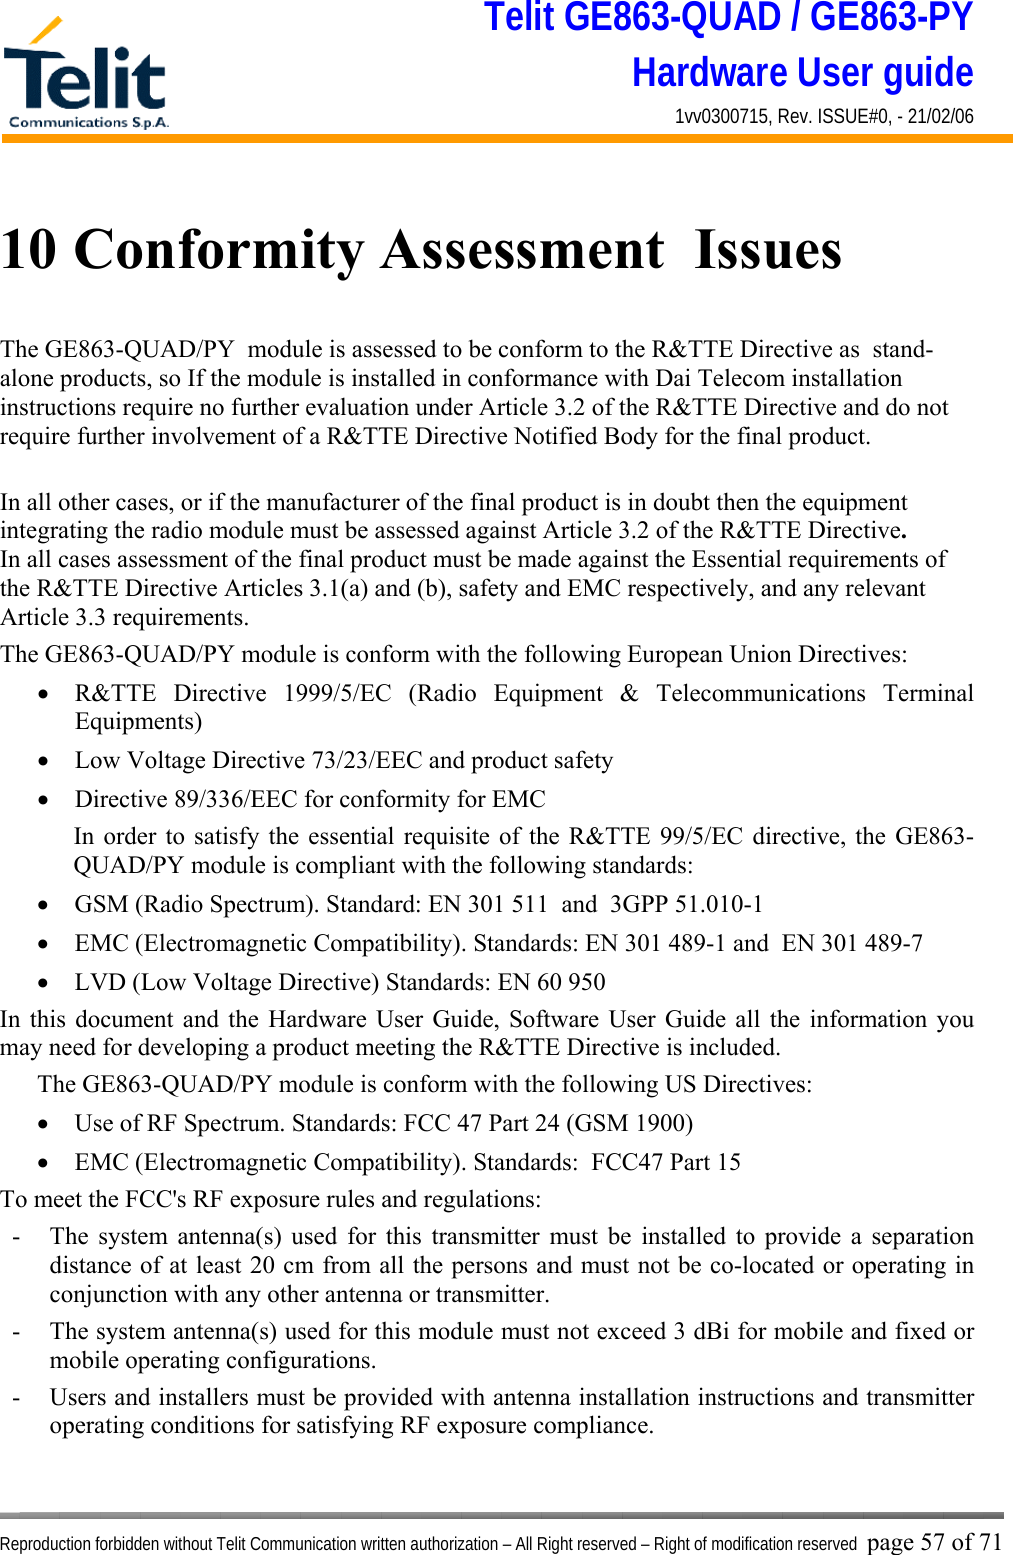 Telit GE863-QUAD / GE863-PY Hardware User guide 1vv0300715, Rev. ISSUE#0, - 21/02/06    Reproduction forbidden without Telit Communication written authorization – All Right reserved – Right of modification reserved page 57 of 71 10 Conformity Assessment  Issues The GE863-QUAD/PY  module is assessed to be conform to the R&amp;TTE Directive as  stand-alone products, so If the module is installed in conformance with Dai Telecom installation instructions require no further evaluation under Article 3.2 of the R&amp;TTE Directive and do not require further involvement of a R&amp;TTE Directive Notified Body for the final product.  In all other cases, or if the manufacturer of the final product is in doubt then the equipment integrating the radio module must be assessed against Article 3.2 of the R&amp;TTE Directive.  In all cases assessment of the final product must be made against the Essential requirements of the R&amp;TTE Directive Articles 3.1(a) and (b), safety and EMC respectively, and any relevant Article 3.3 requirements. The GE863-QUAD/PY module is conform with the following European Union Directives: •  R&amp;TTE Directive 1999/5/EC (Radio Equipment &amp; Telecommunications Terminal Equipments) •  Low Voltage Directive 73/23/EEC and product safety •  Directive 89/336/EEC for conformity for EMC In order to satisfy the essential requisite of the R&amp;TTE 99/5/EC directive, the GE863-QUAD/PY module is compliant with the following standards:  •  GSM (Radio Spectrum). Standard: EN 301 511  and  3GPP 51.010-1  •  EMC (Electromagnetic Compatibility). Standards: EN 301 489-1 and  EN 301 489-7 •  LVD (Low Voltage Directive) Standards: EN 60 950 In this document and the Hardware User Guide, Software User Guide all the information you may need for developing a product meeting the R&amp;TTE Directive is included. The GE863-QUAD/PY module is conform with the following US Directives: •  Use of RF Spectrum. Standards: FCC 47 Part 24 (GSM 1900) •  EMC (Electromagnetic Compatibility). Standards:  FCC47 Part 15 To meet the FCC&apos;s RF exposure rules and regulations: -  The system antenna(s) used for this transmitter must be installed to provide a separation distance of at least 20 cm from all the persons and must not be co-located or operating in conjunction with any other antenna or transmitter. -  The system antenna(s) used for this module must not exceed 3 dBi for mobile and fixed or mobile operating configurations. -  Users and installers must be provided with antenna installation instructions and transmitter operating conditions for satisfying RF exposure compliance. 